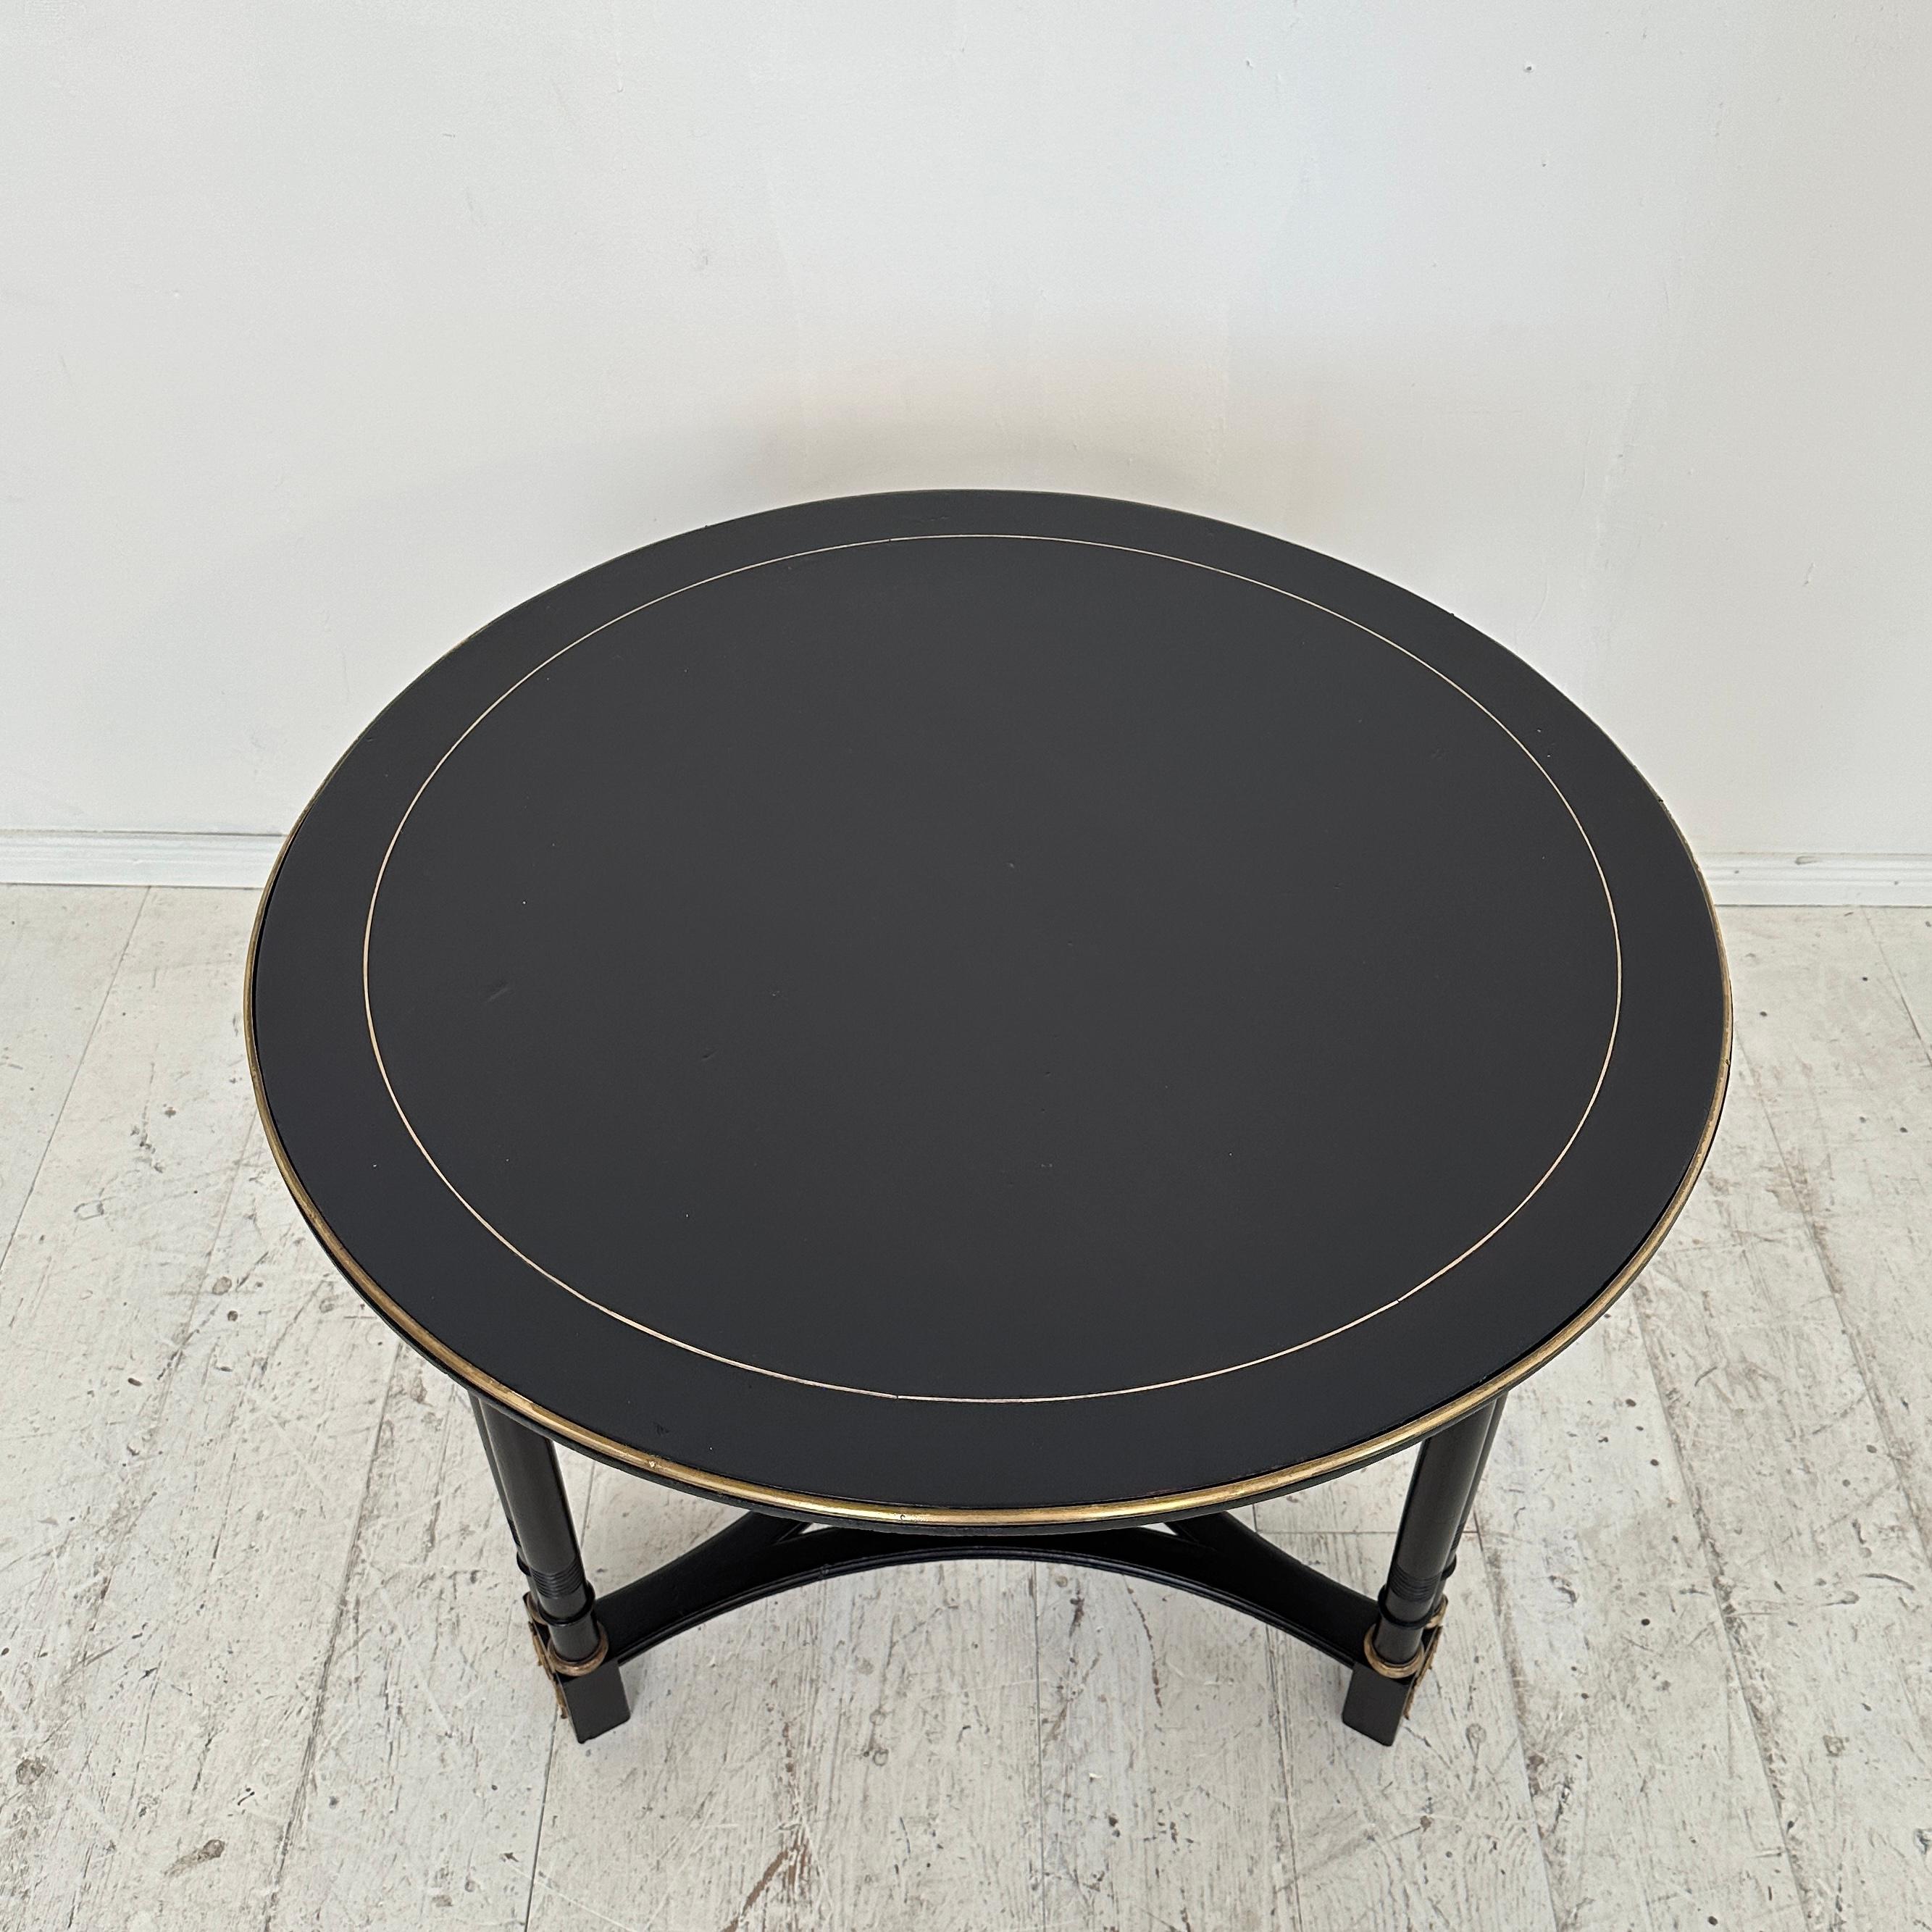 19th Century Black Round Gueridon Empire Style Table, around 1870 For Sale 4